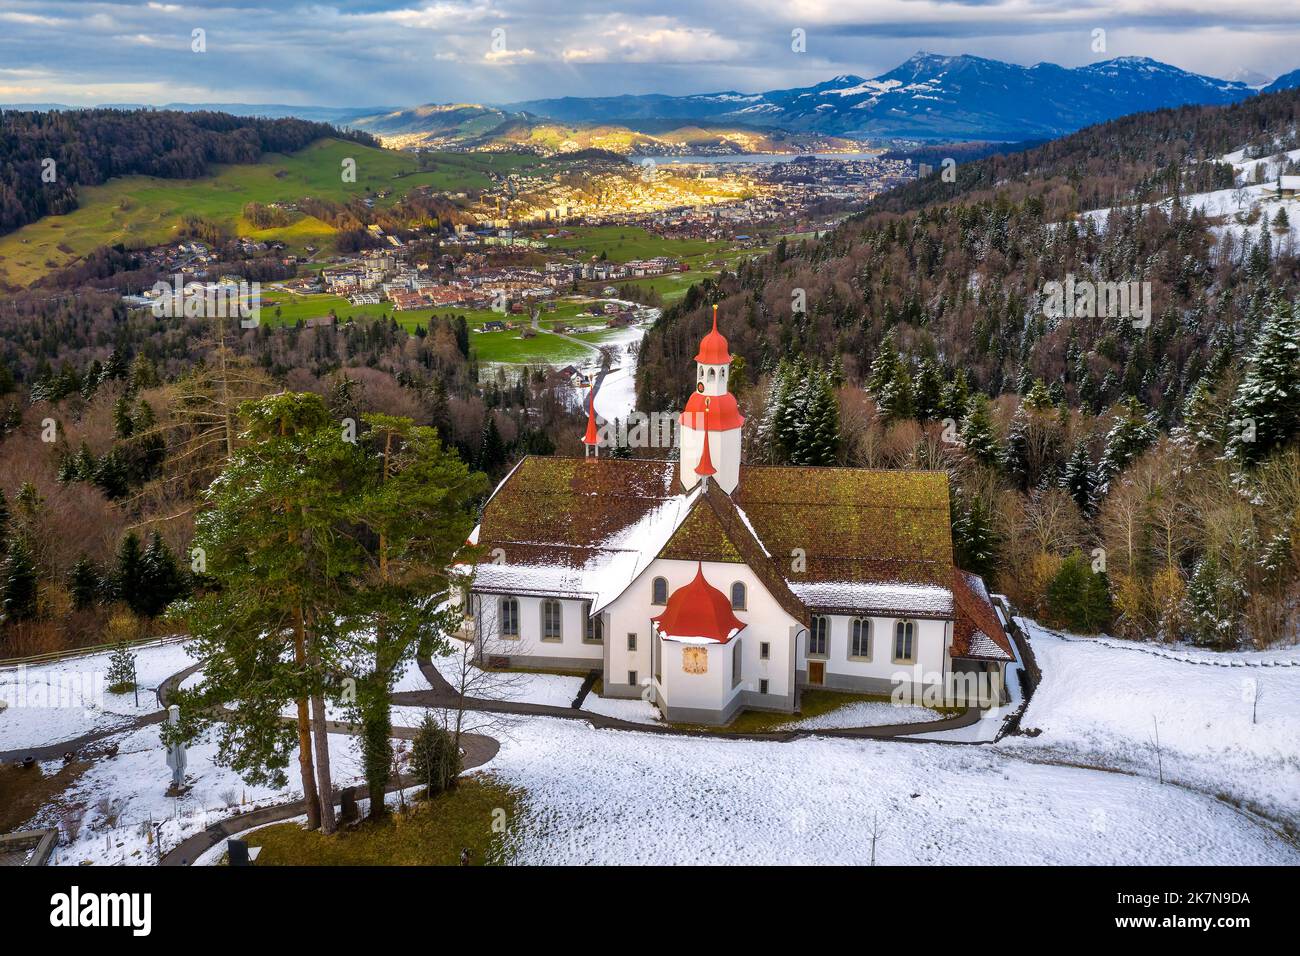 Hergiswald church in swiss Alps mountains, high above Lucerne city, is an important historical pilgrimage destination in Switzerland Stock Photo